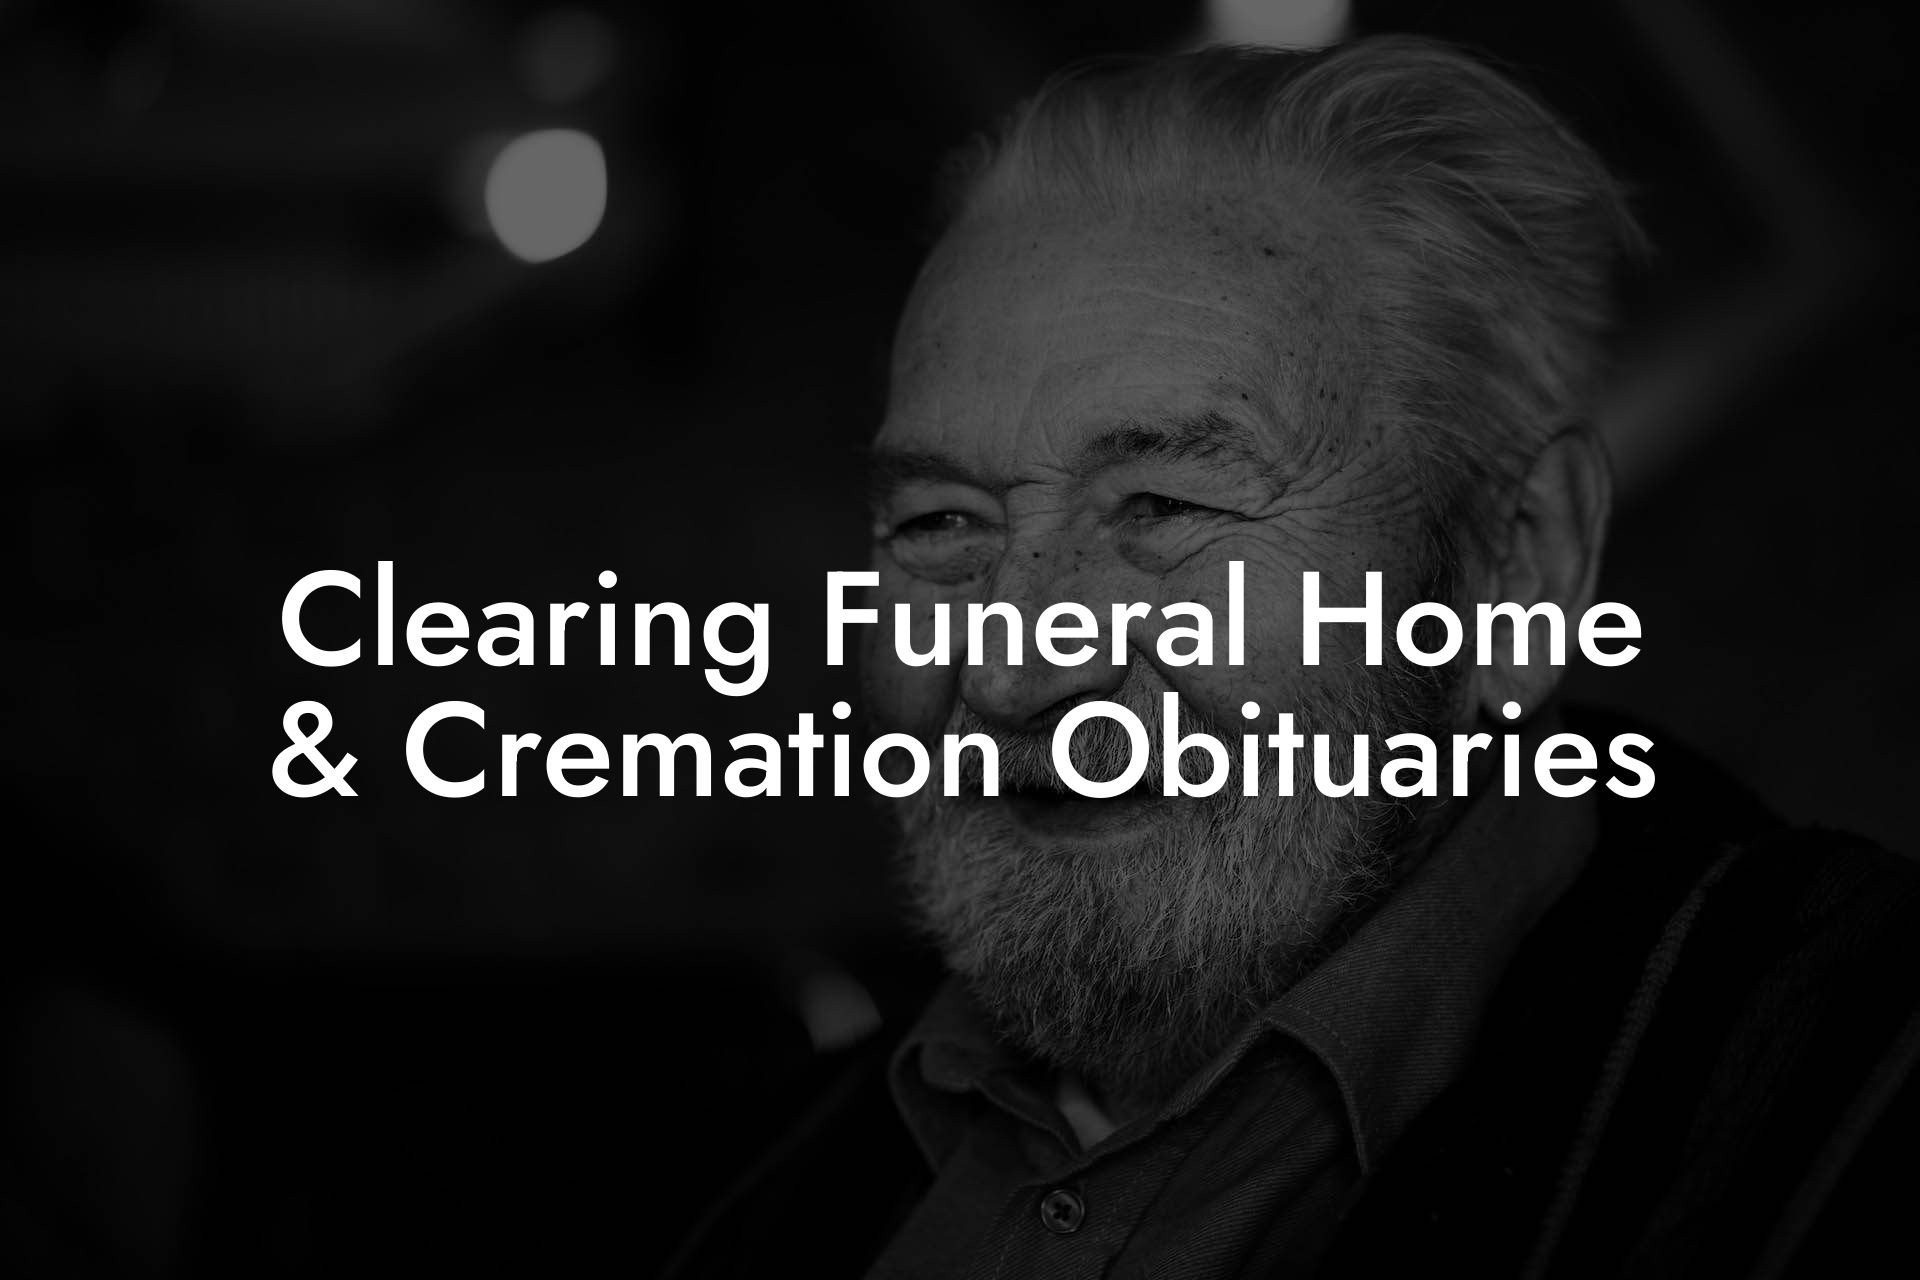 Clearing Funeral Home & Cremation Obituaries